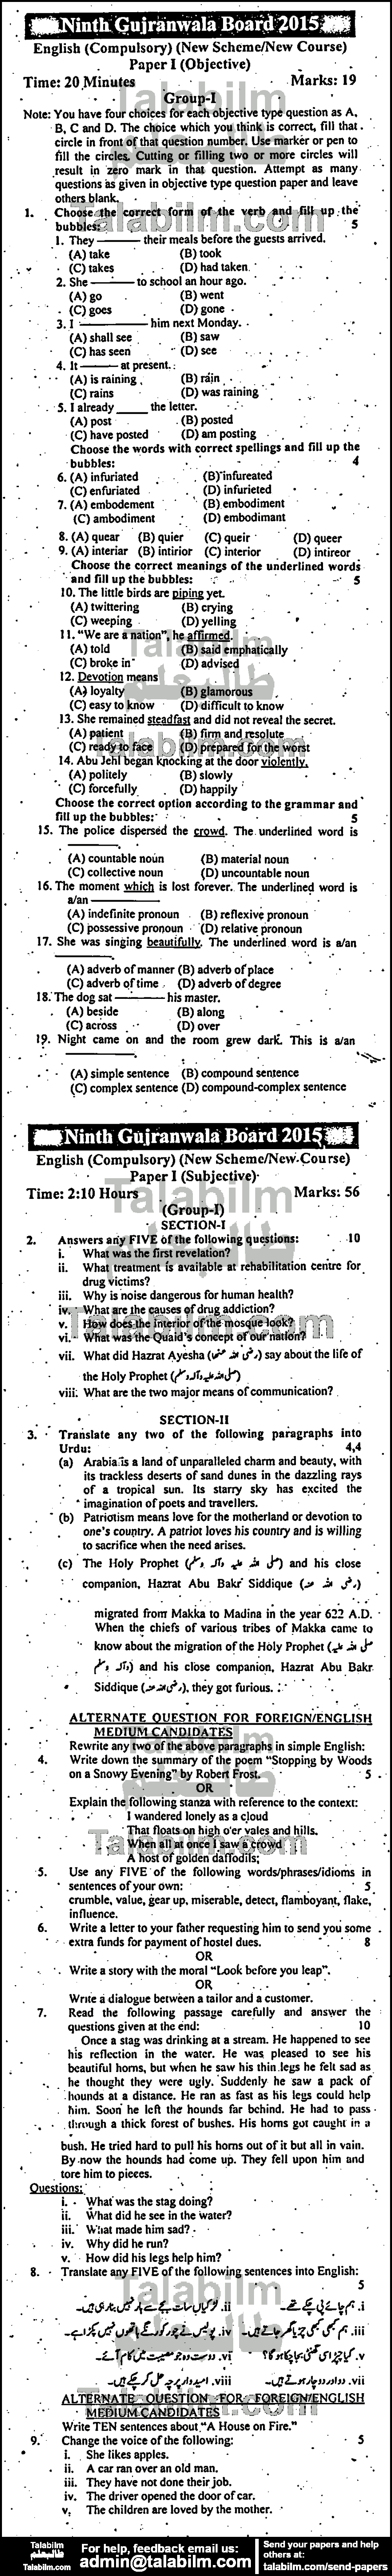 English 0 past paper for 2015 Group-I